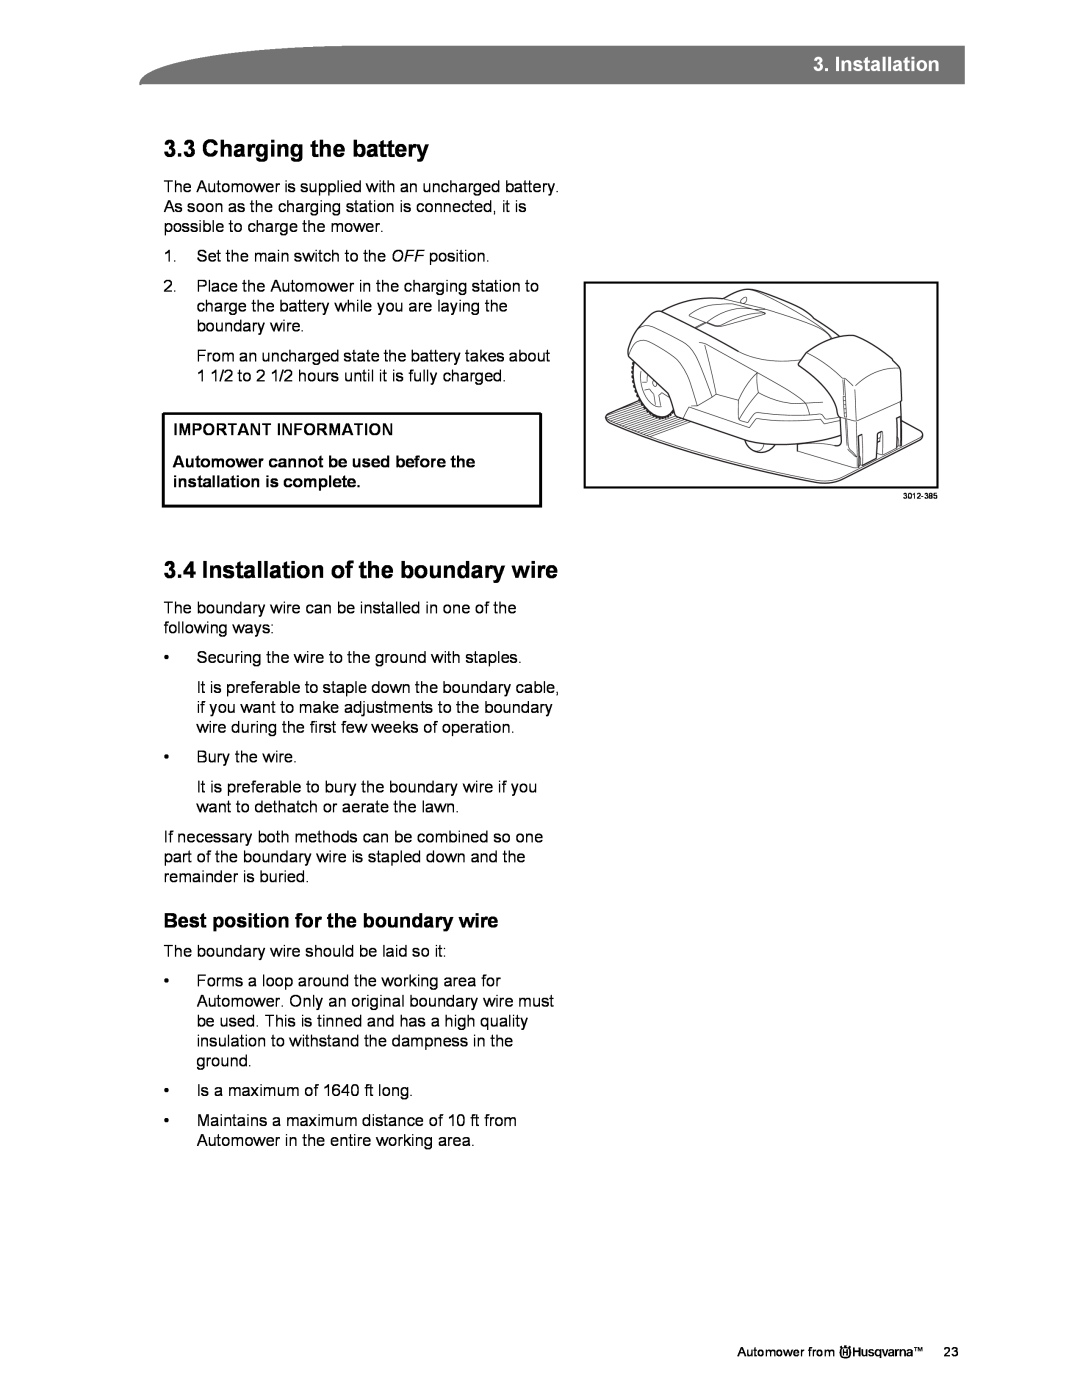 Husqvarna Automower manual Charging the battery, Installation of the boundary wire, Best position for the boundary wire 